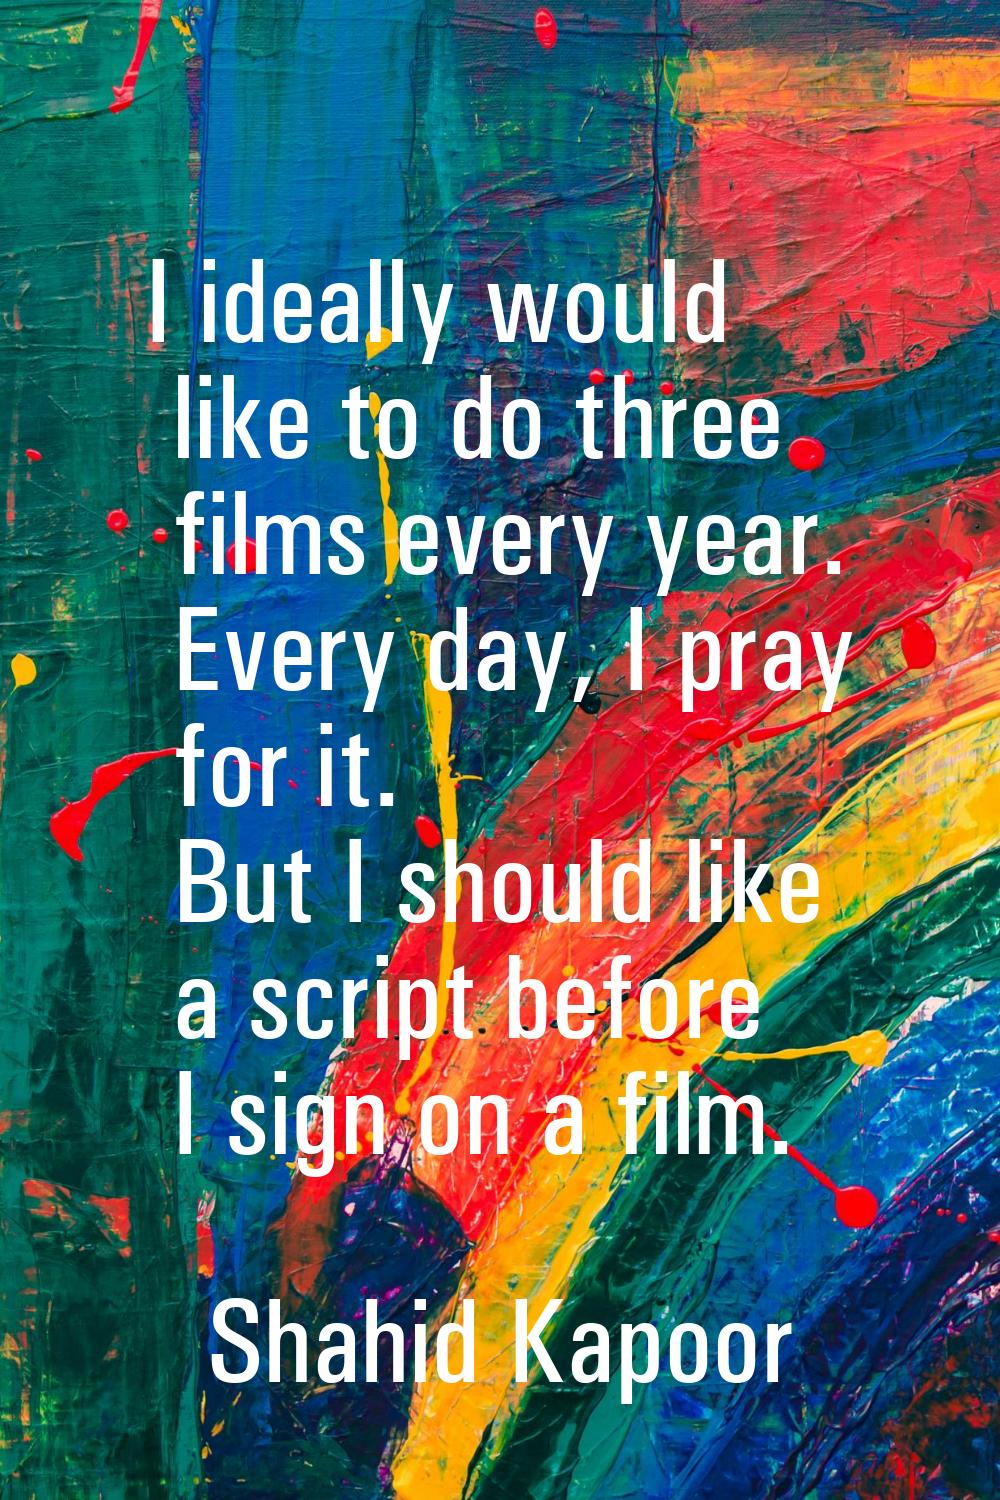 I ideally would like to do three films every year. Every day, I pray for it. But I should like a sc